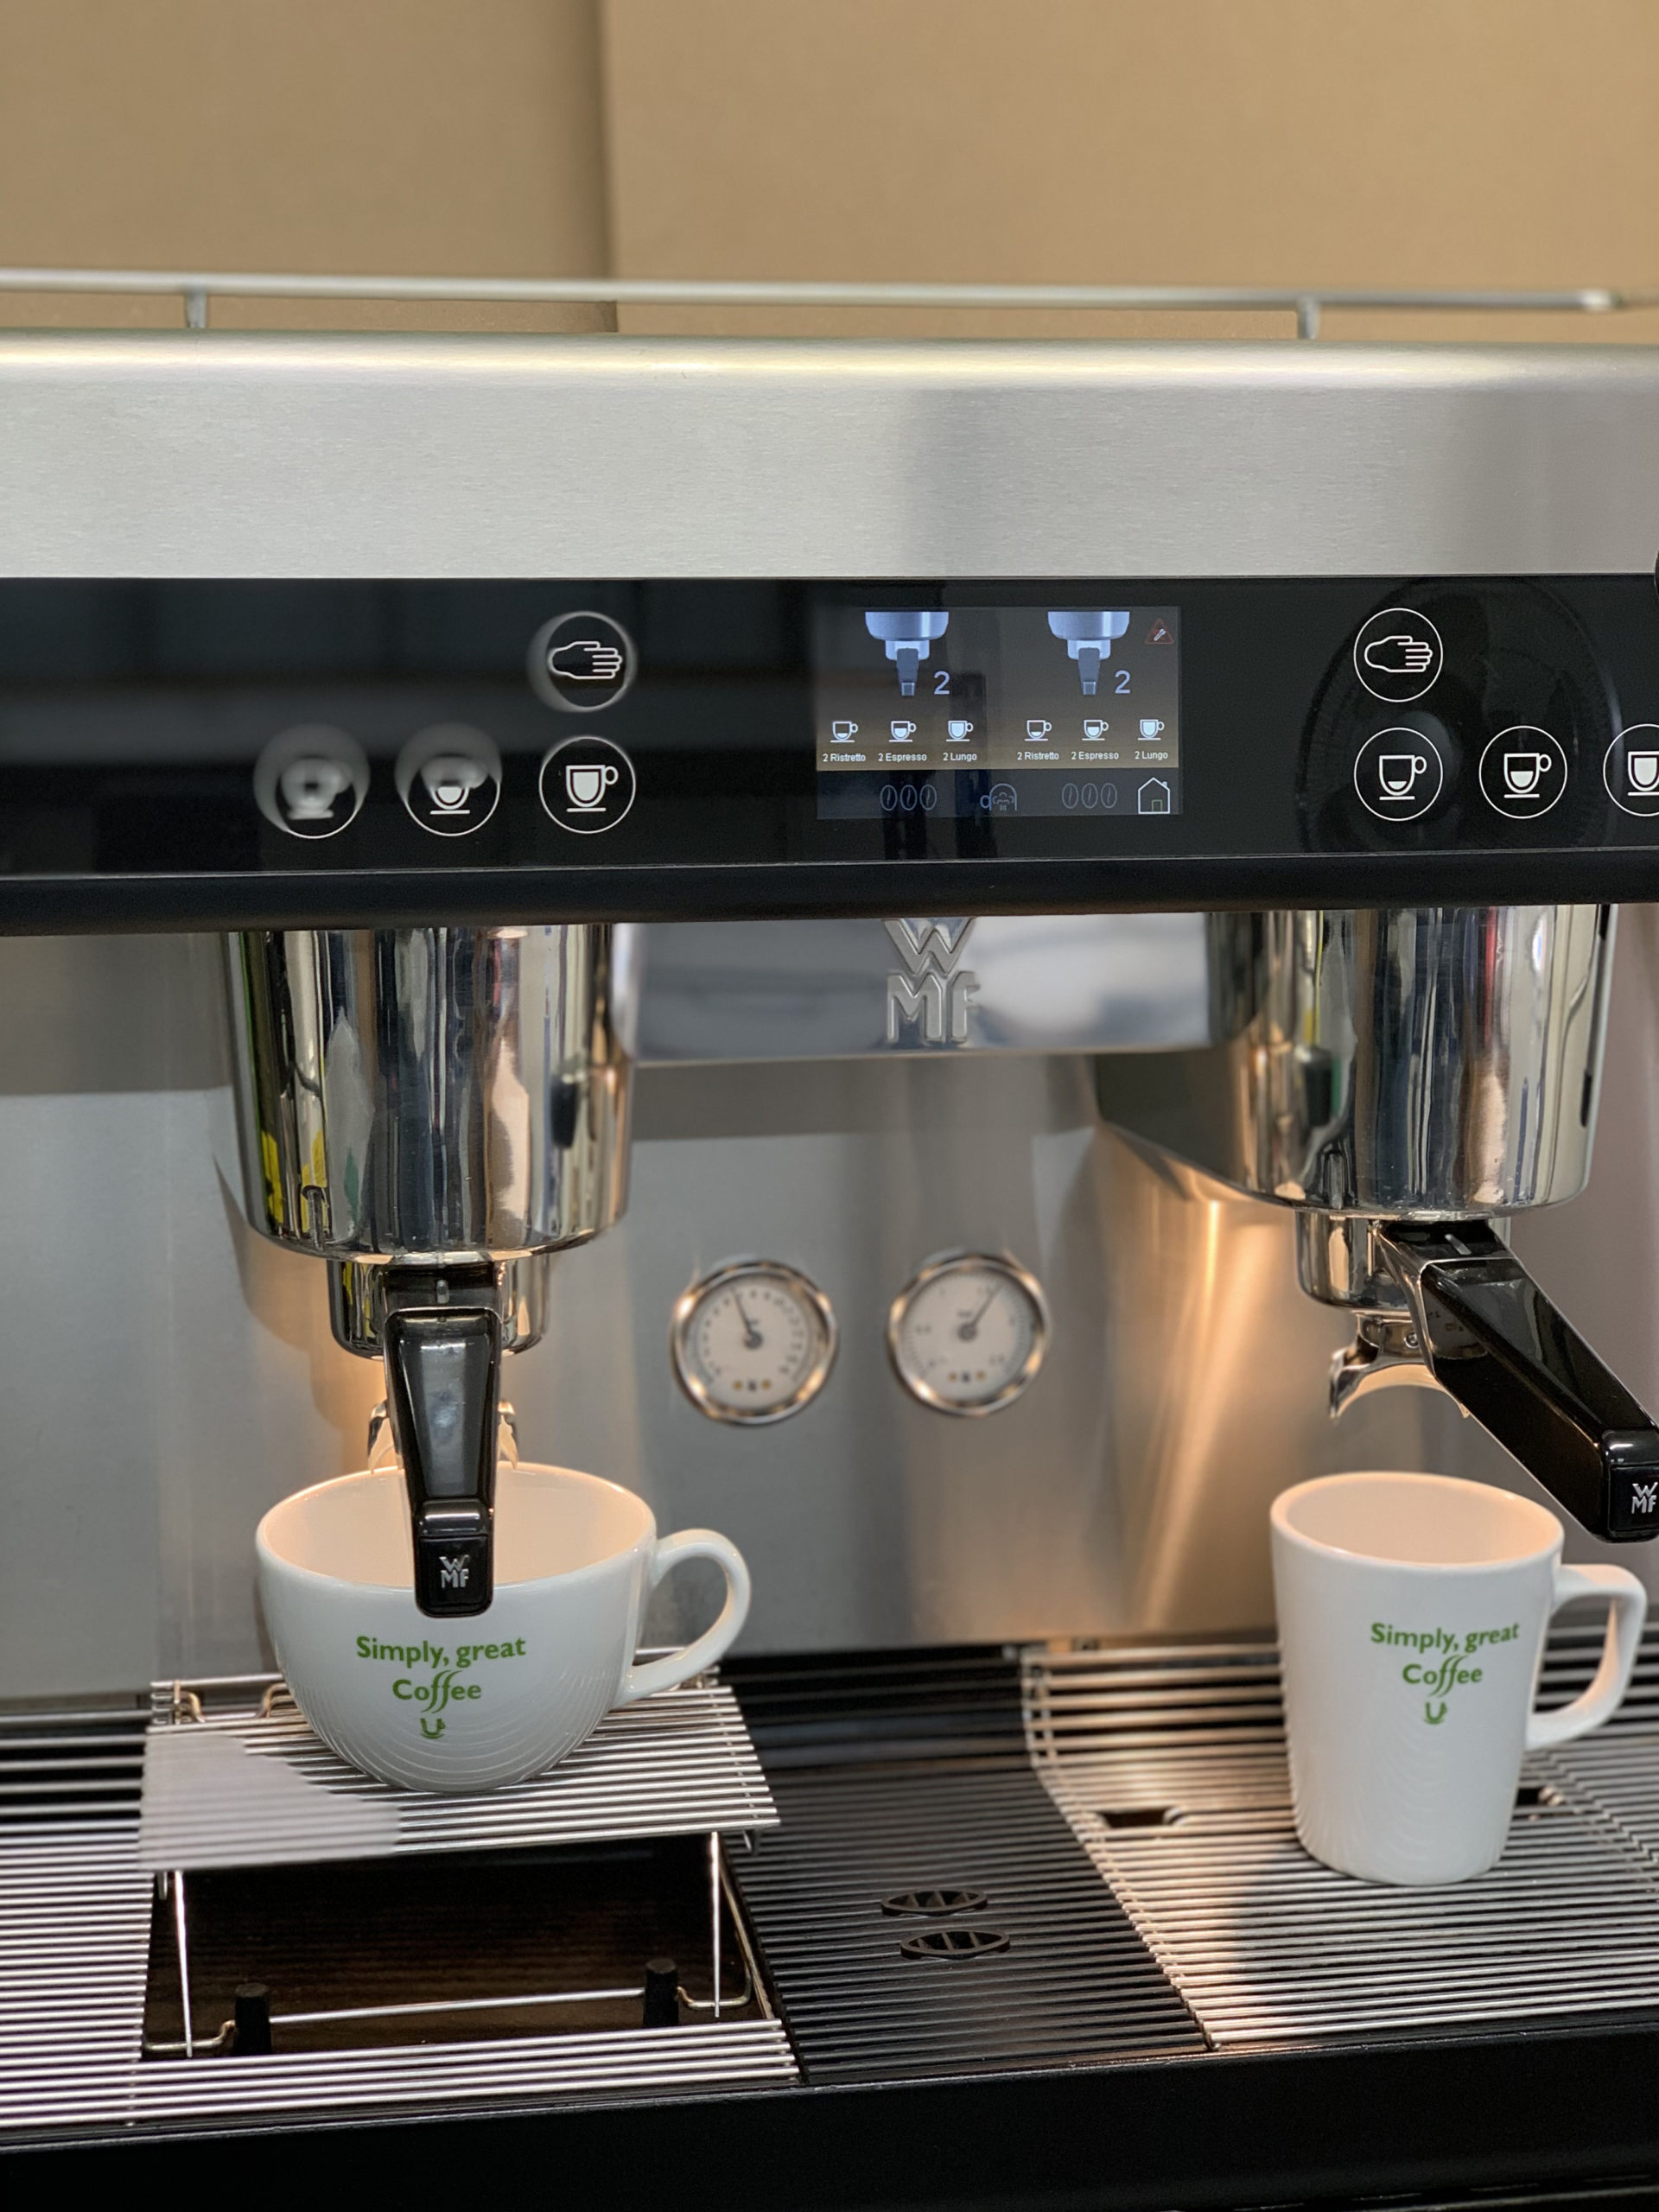 Wmf Espresso 2 Group Bean To Cup Coffee Machine Fully Refurbished